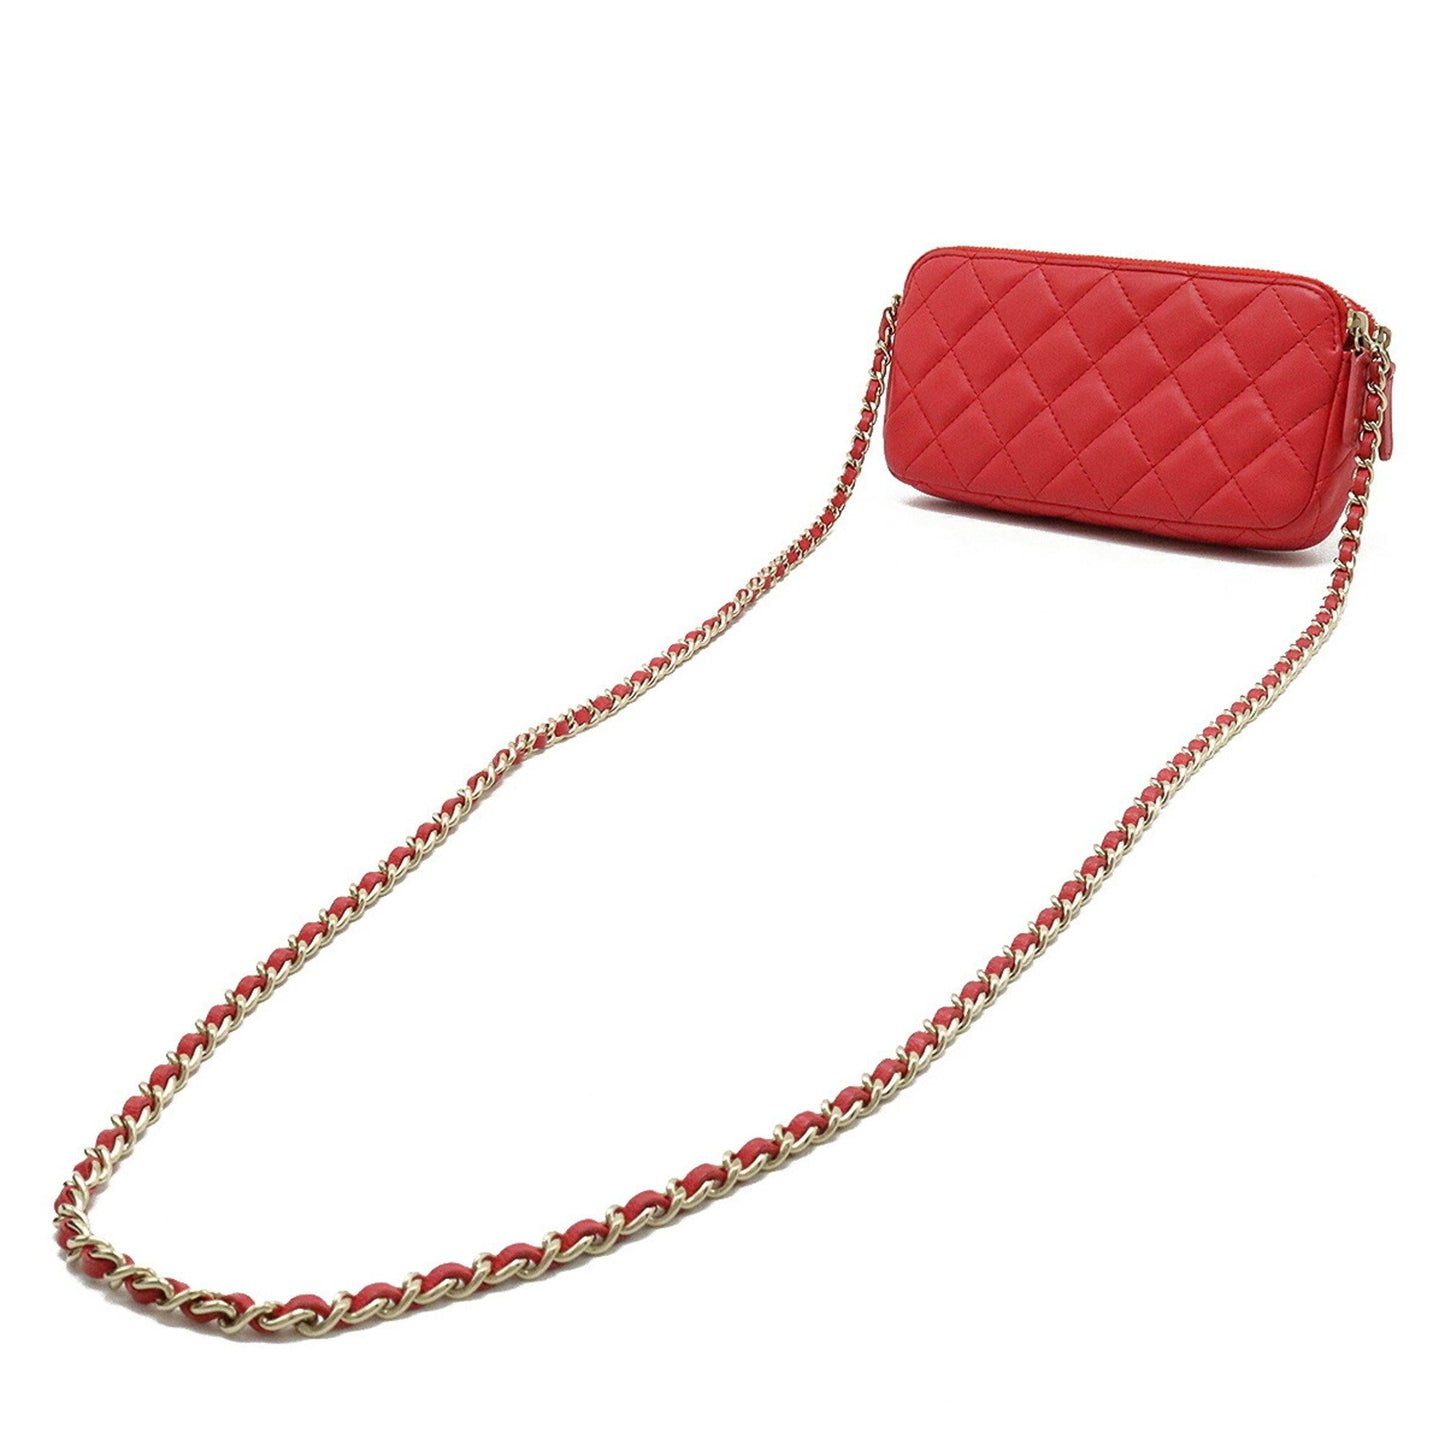 Chanel Women's Red Leather Clutch Bag with Shoulder Strap in Red